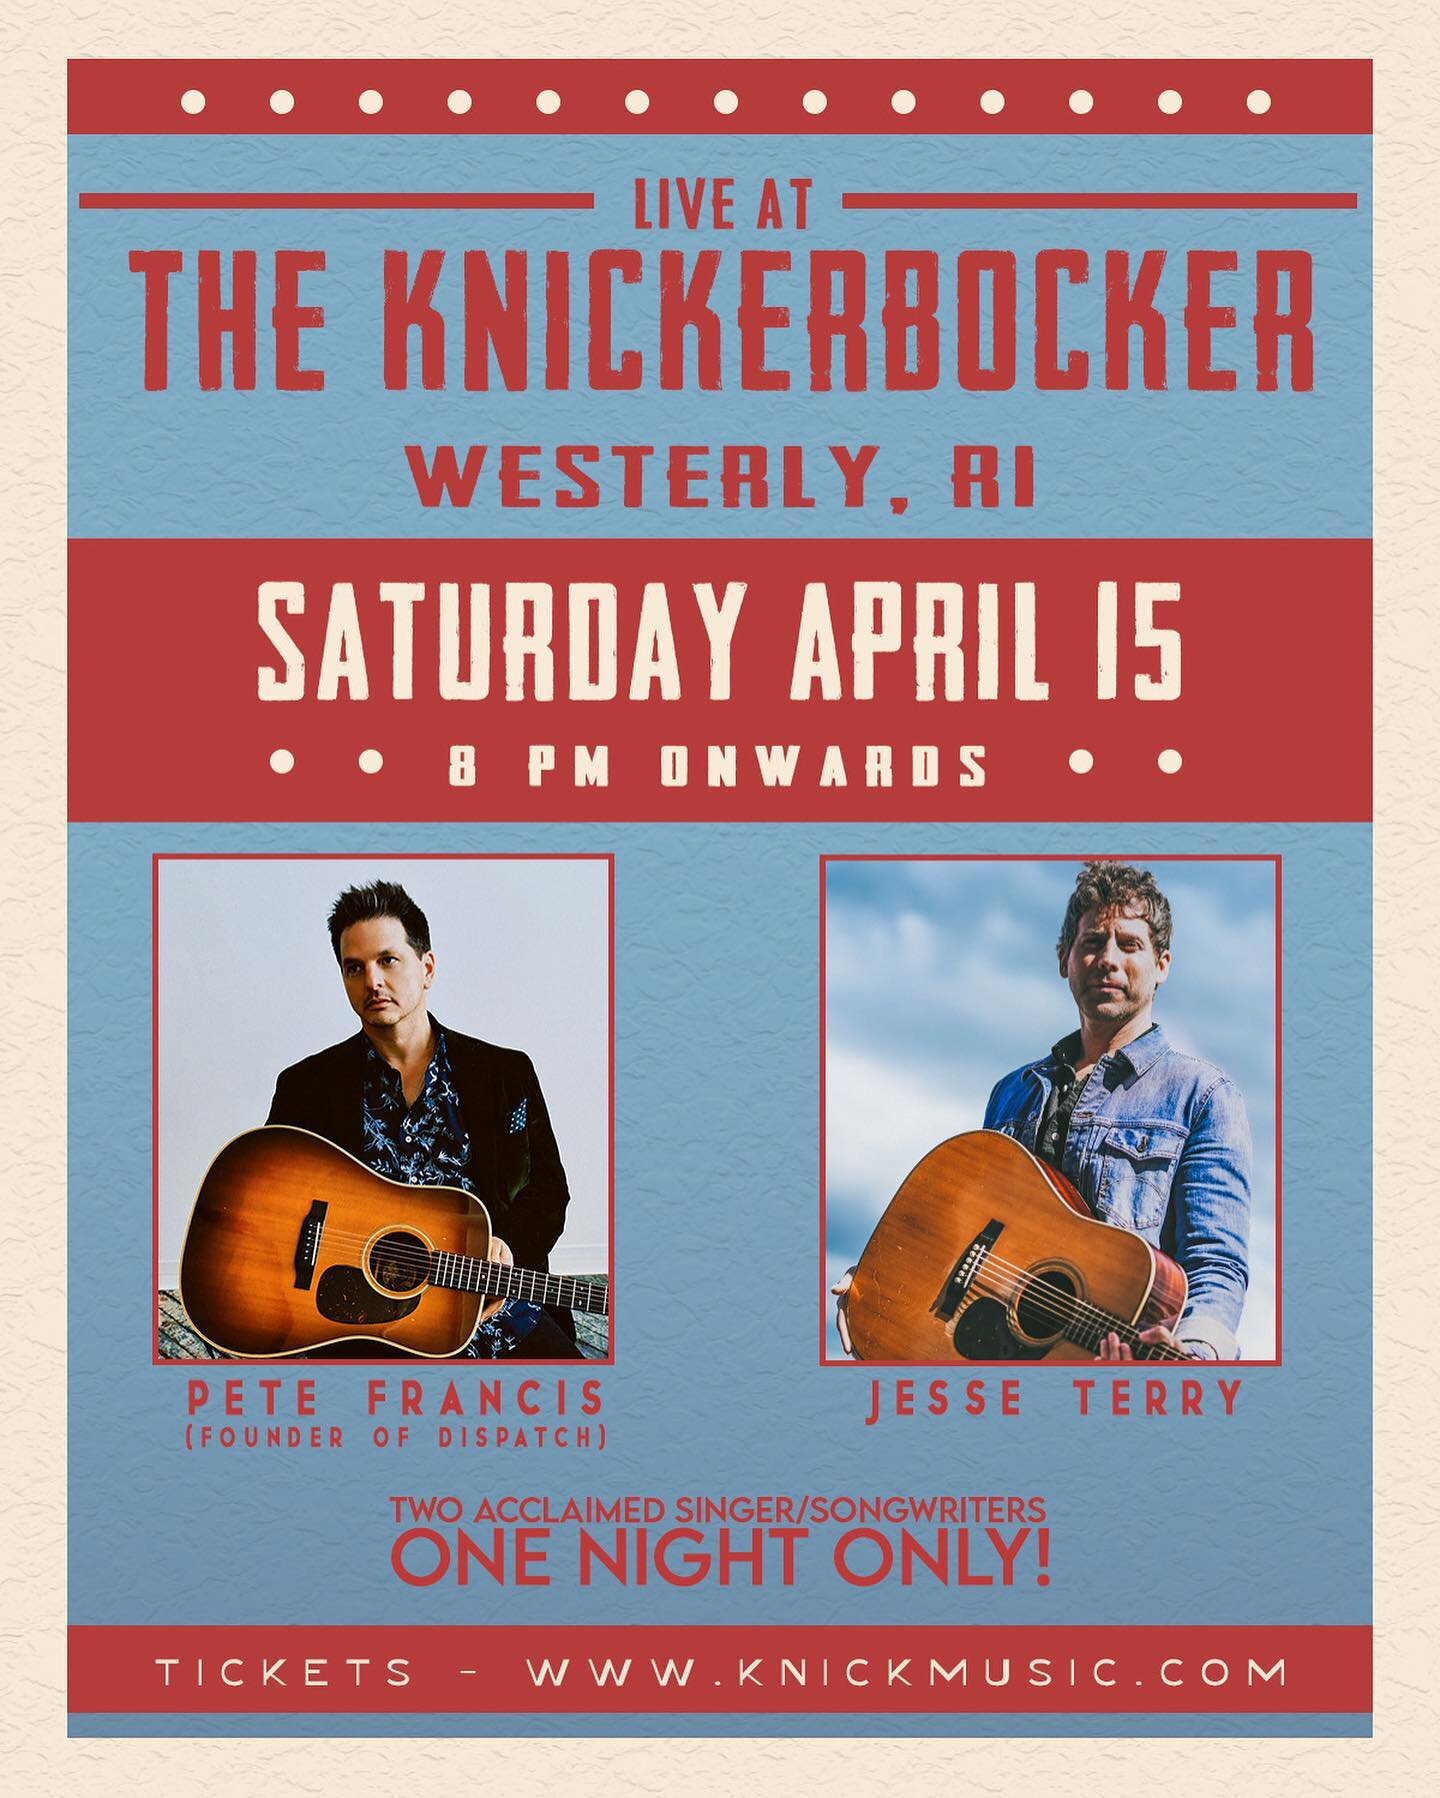 Hometown Westerly, RI show coming up on April 15th w/ @petefrancis3 @knickmusicri ⚡️ ⚡️ Grad discounted advance tickets on my website &amp; save 5 bucks! Excited to see y'all there &amp; play you some brand new tunes!